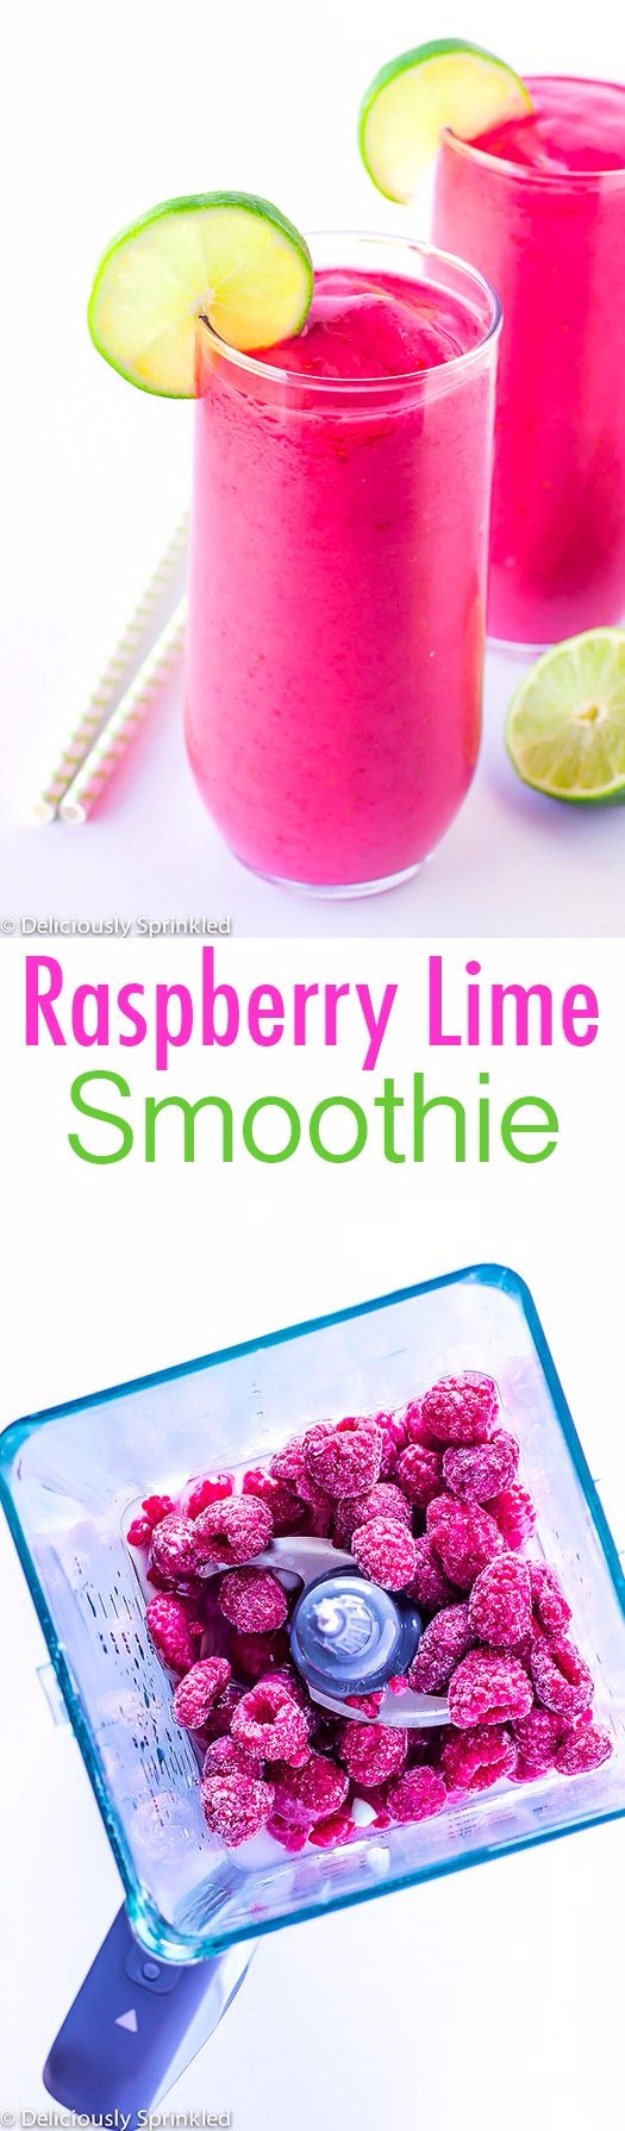 Healthy Smoothie Recipes - Raspberry Lime Smoothie - Easy ideas perfect for breakfast, energy. Low calorie and high protein recipes for weightloss and to lose weight. Simple homemade recipe ideas that kids love. Quick EASY morning recipes before work and school, after workout #smoothies #healthy #smoothie #healthyrecipes #recipes